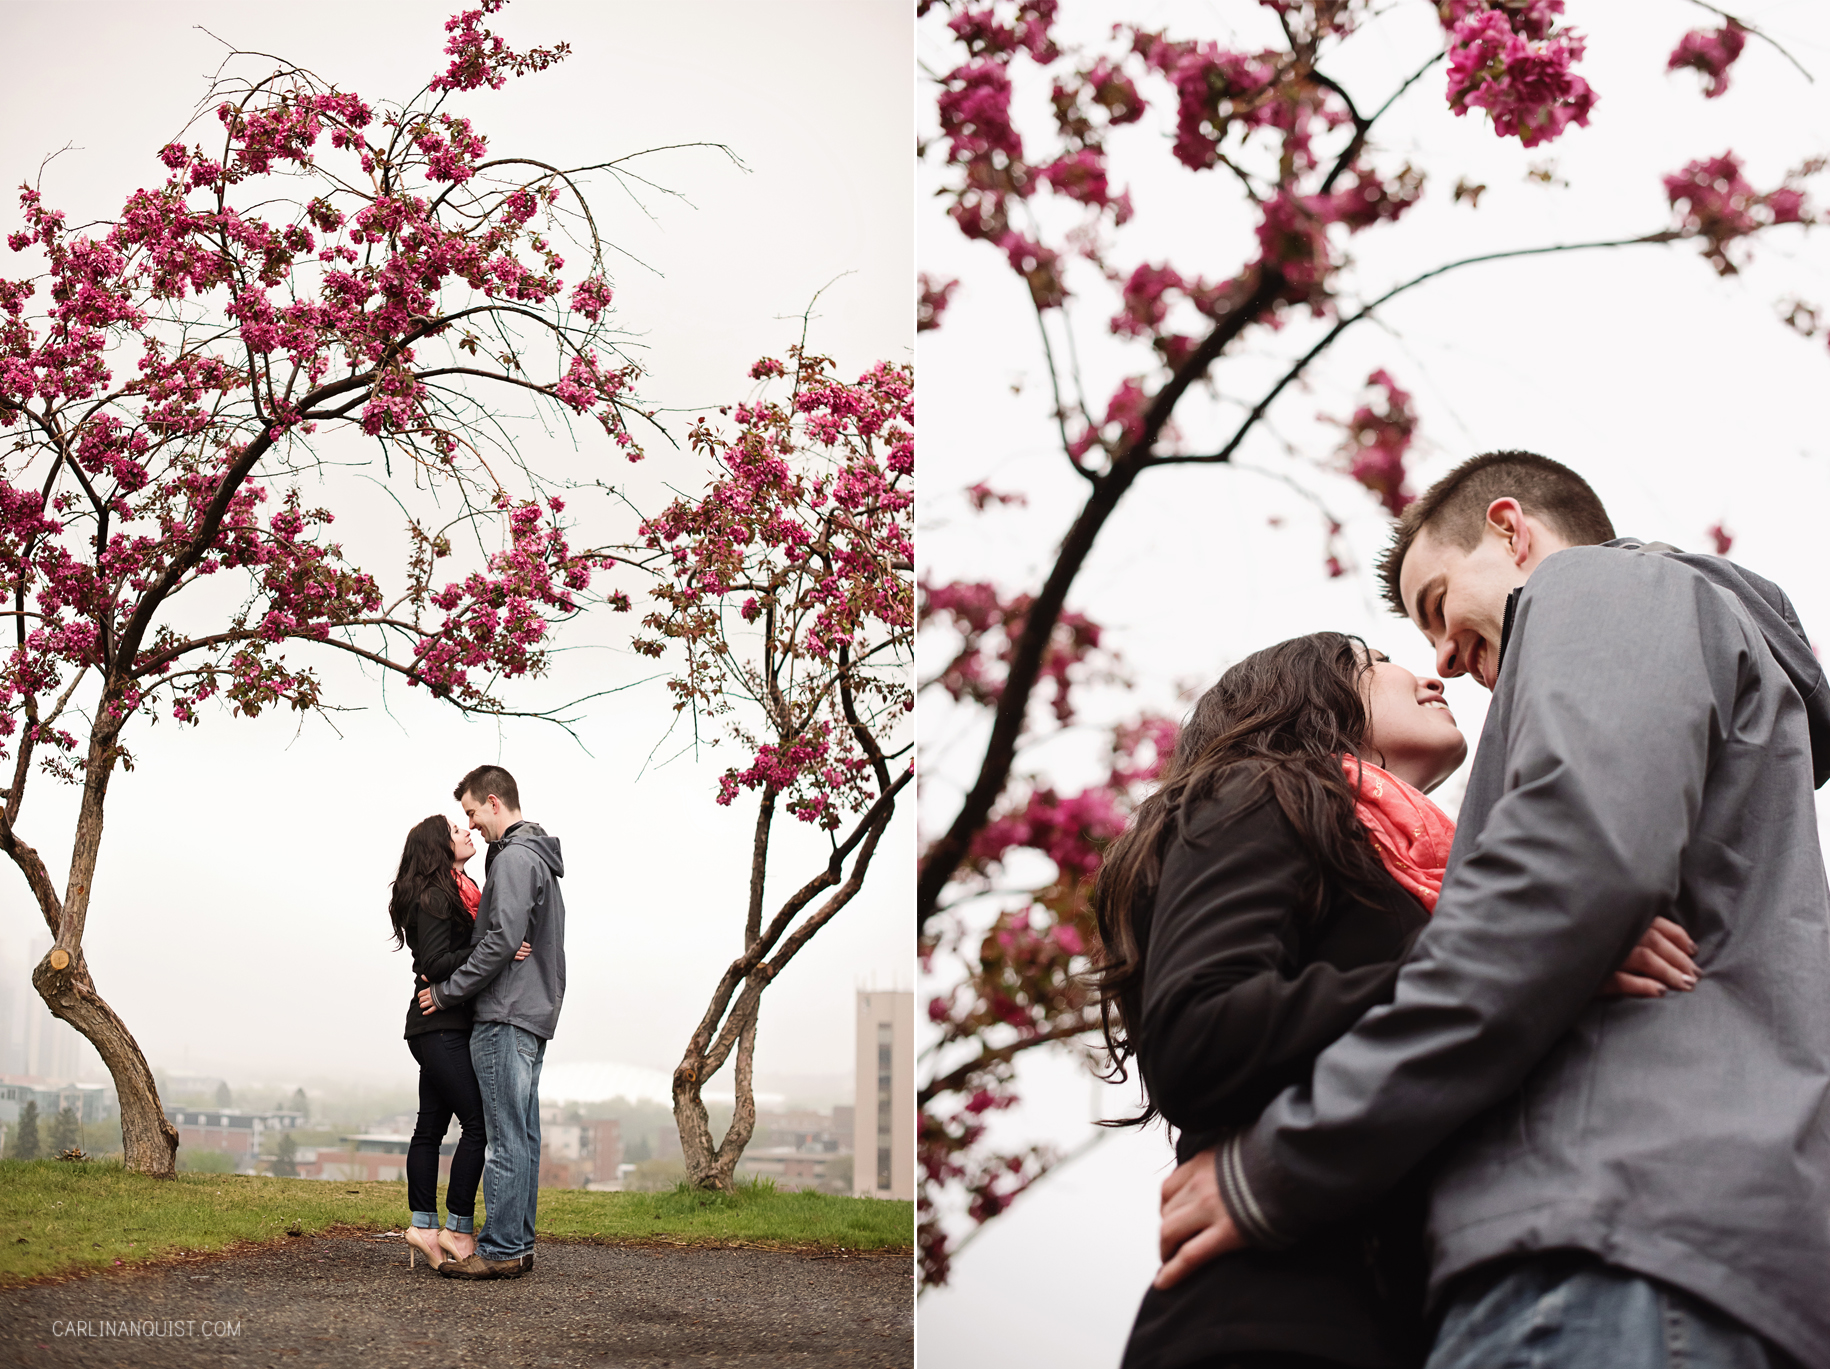 Blossoming Trees | Spring Engagement | Calgary Wedding Photographer | Carlin Anquist Photography